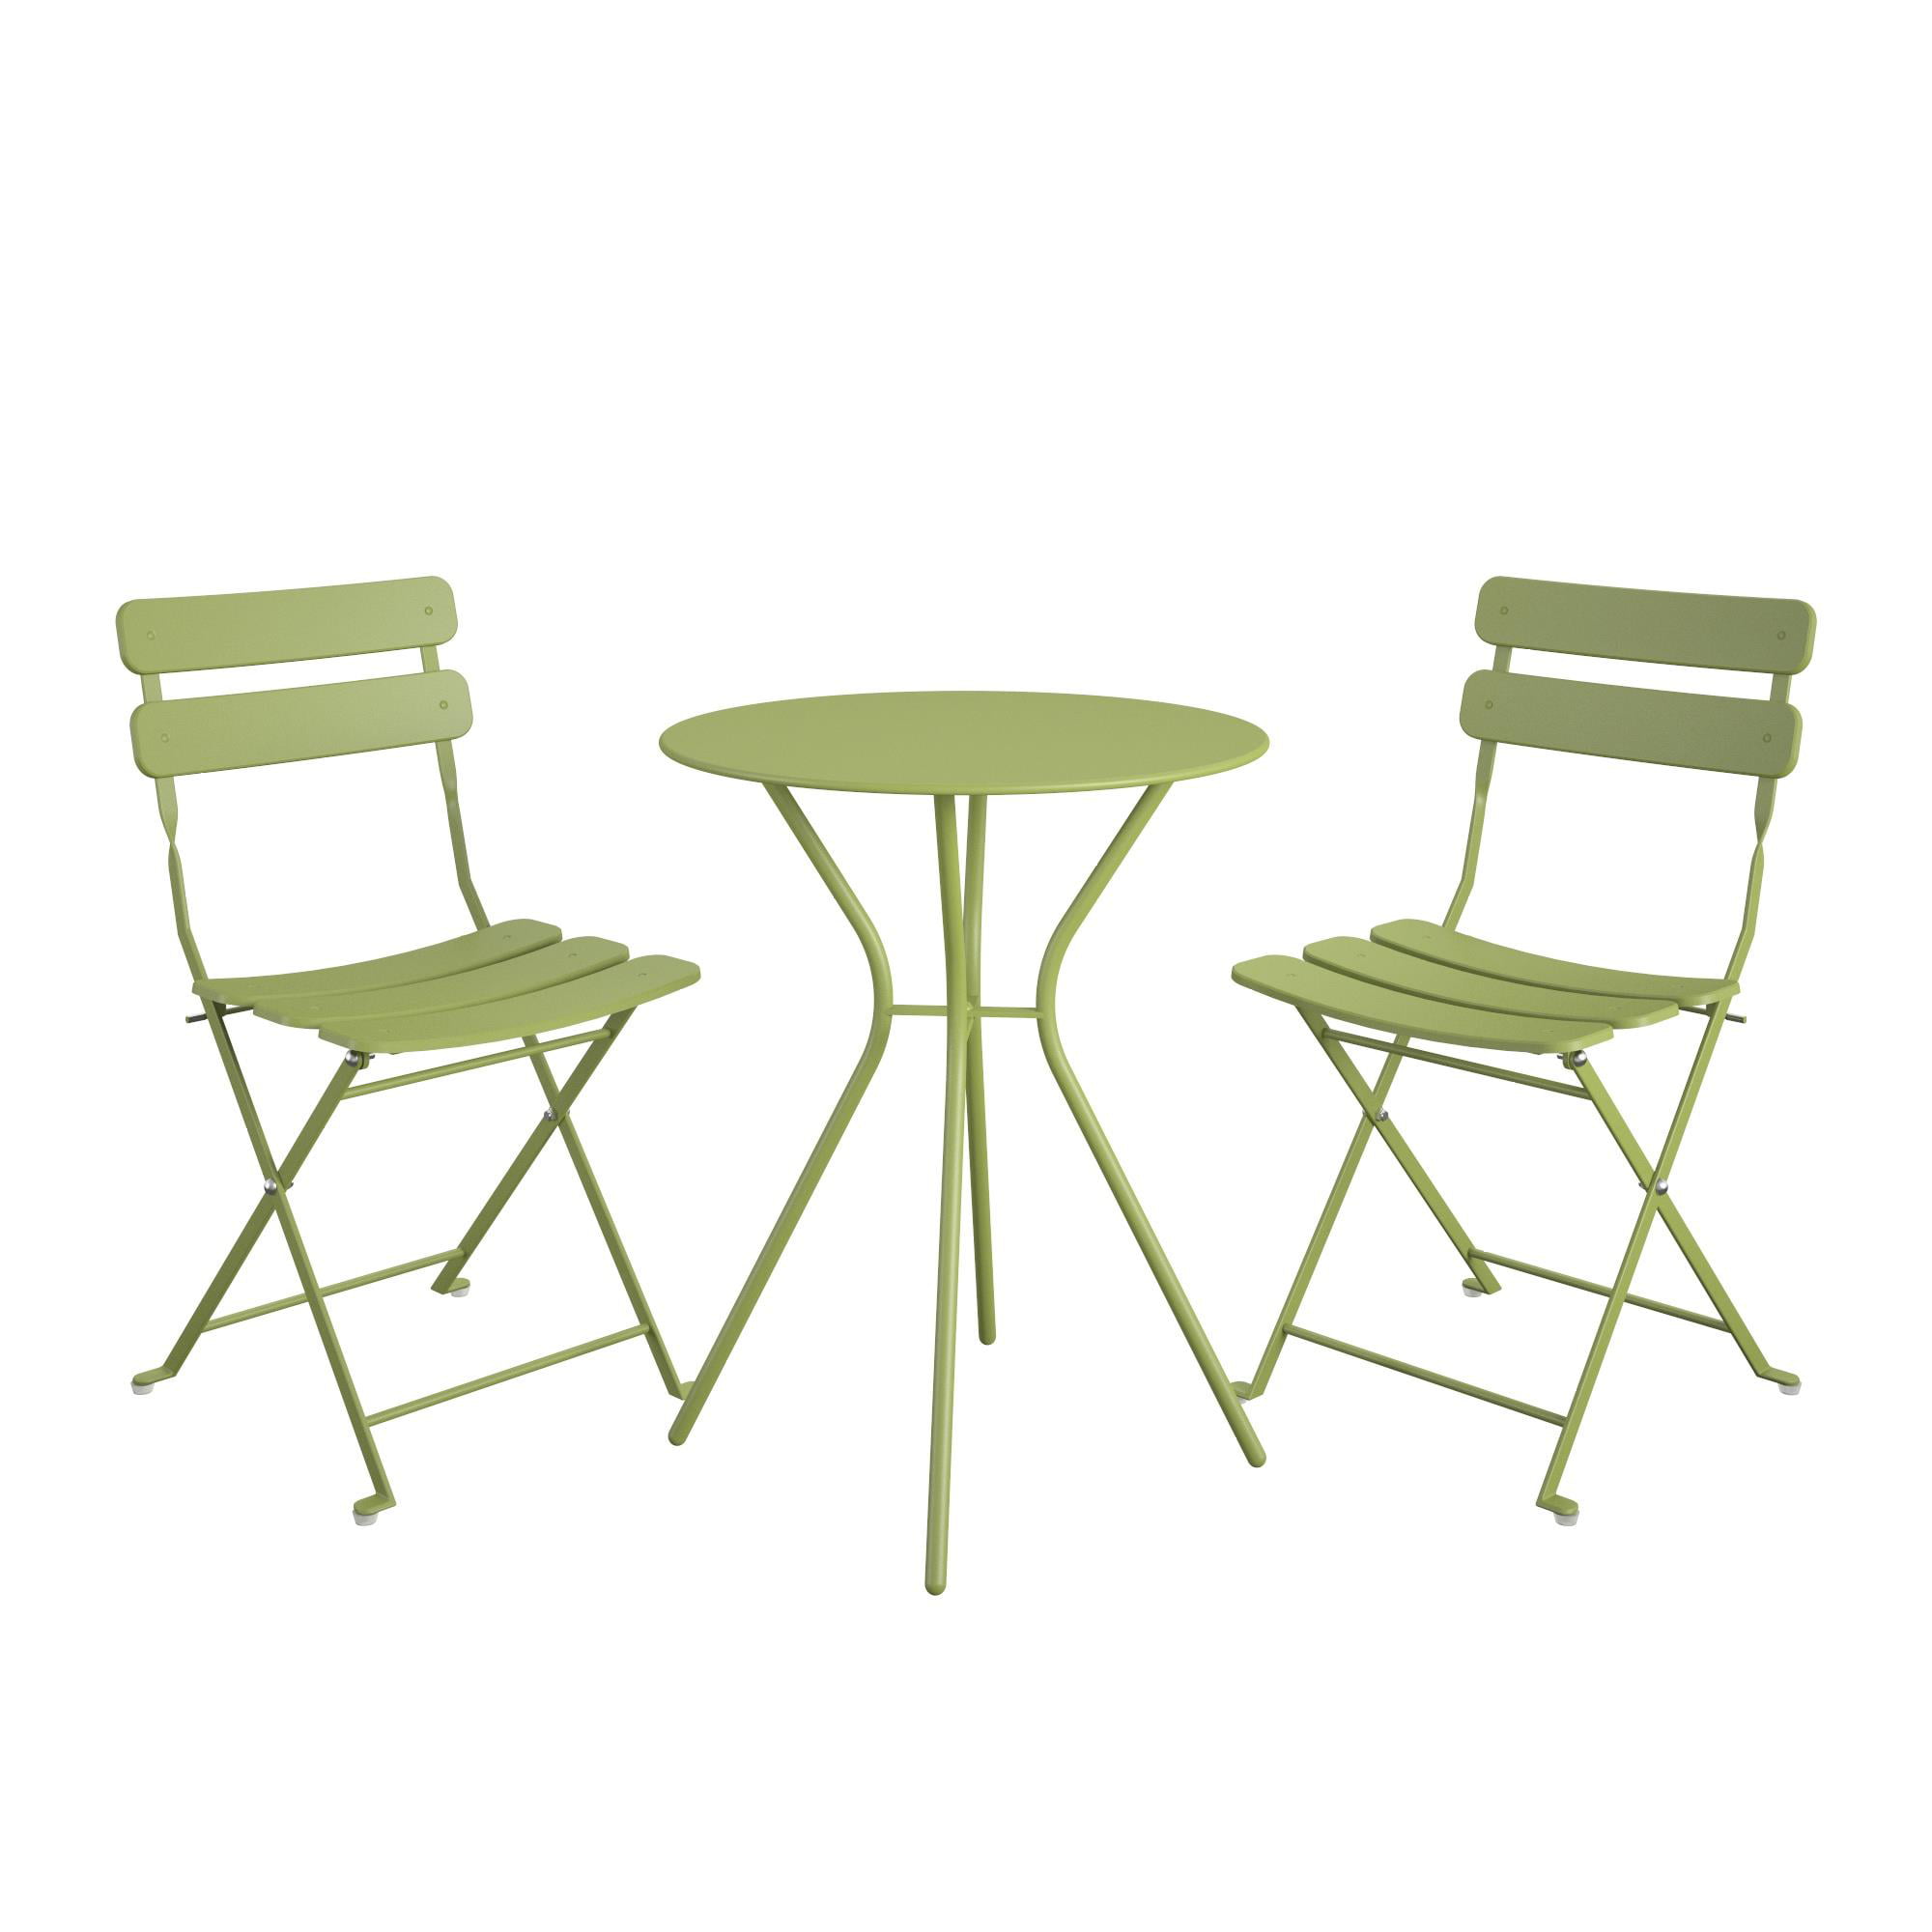 GREEN Powder Coated Steel CKB LTD Garden Bistro Set Metal Outdoor Deluxe Weatherproof 3 Piece Garden Furniture Table And Folding Chairs For Small Patio or Balcony